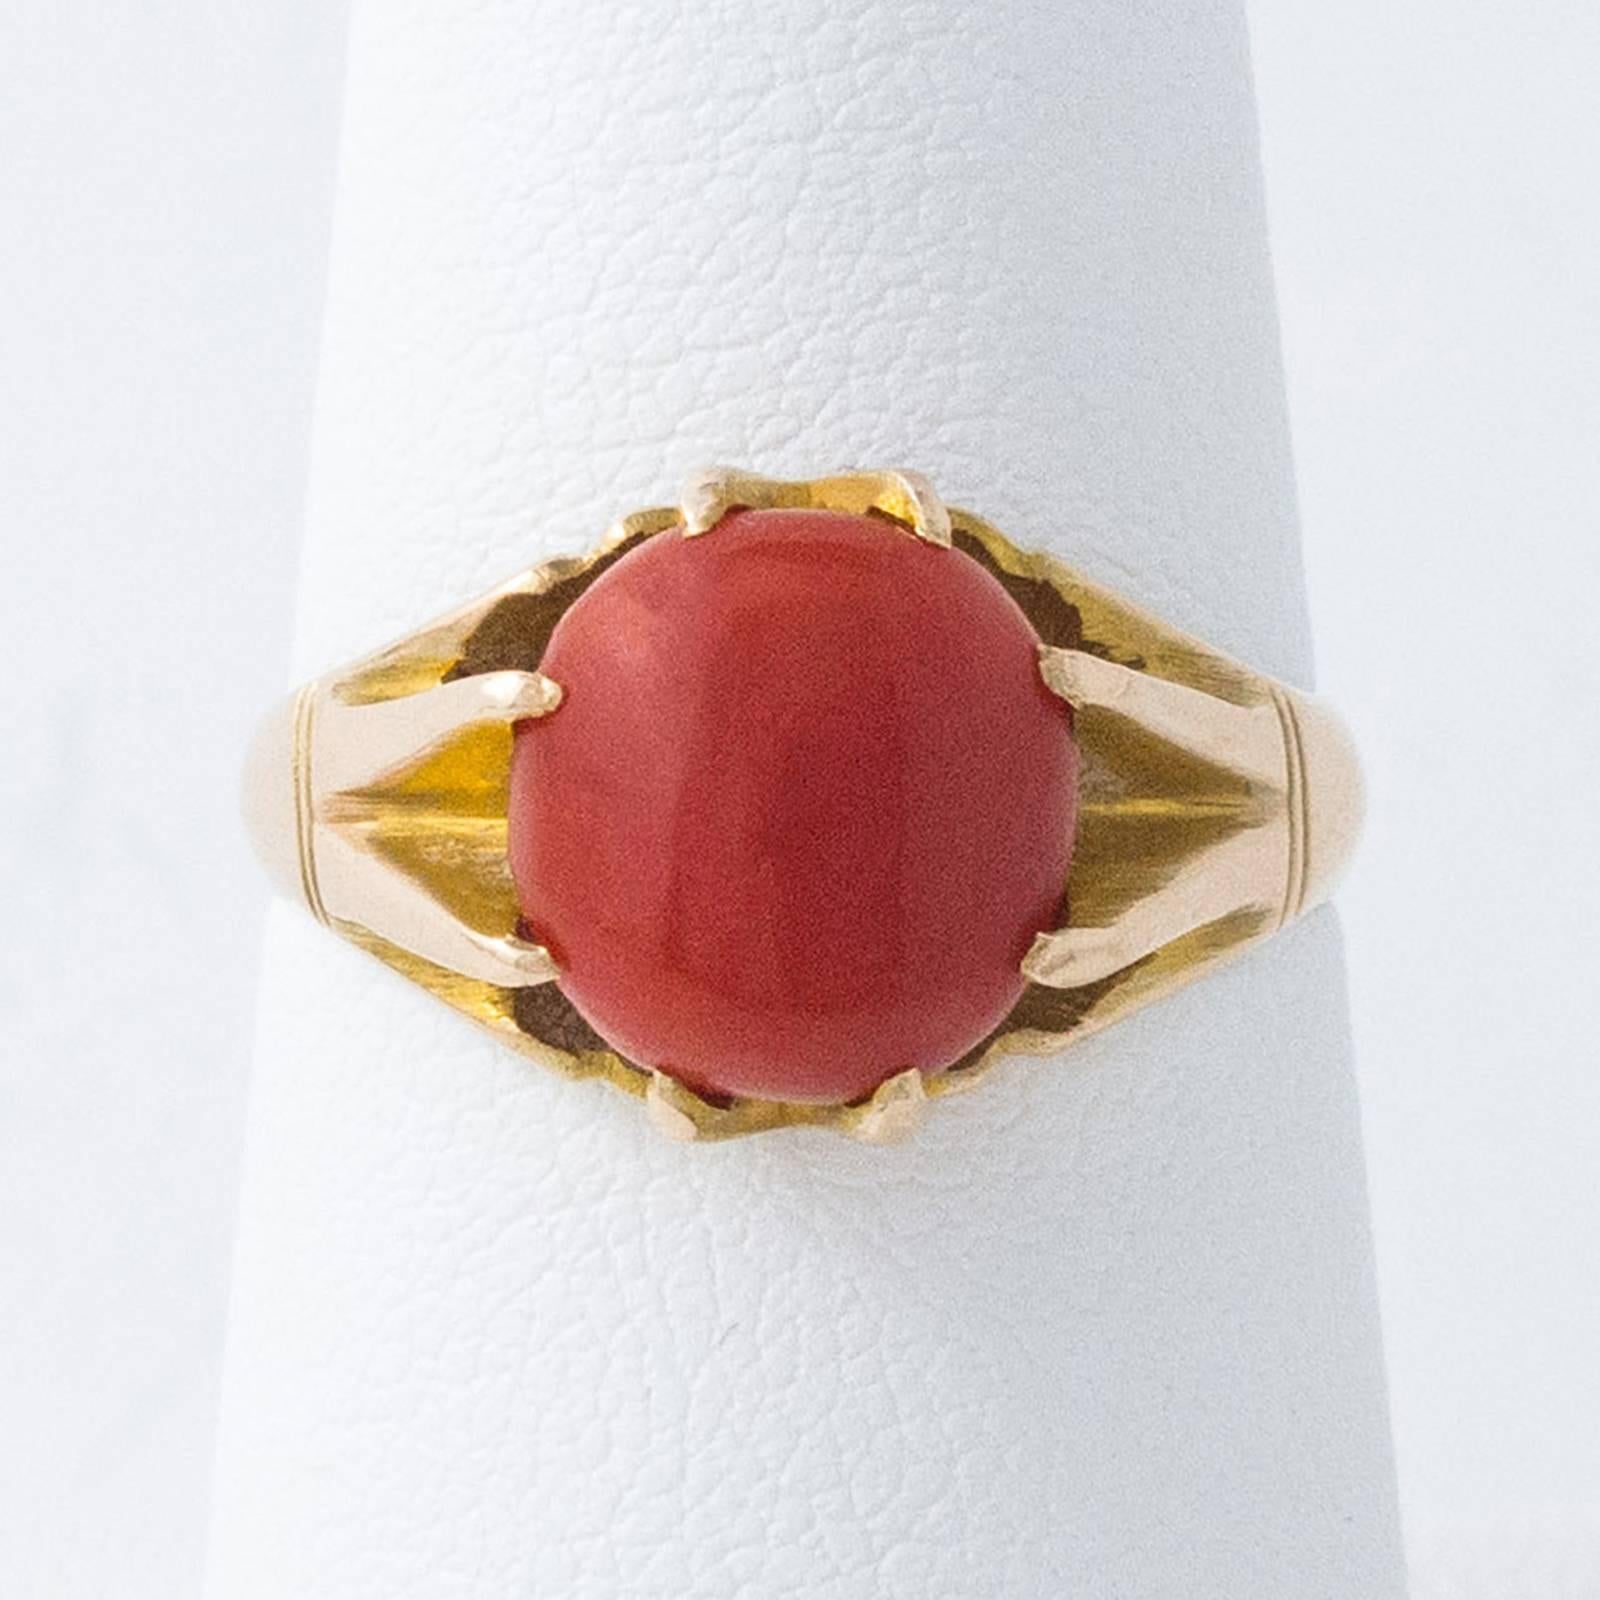 A cabochon cut Red Coral stone is set within 8 decorative claws in this pretty dome style, 14 karat gold tomato-red coral ring.

The top of the ring measures 10mm north to south and rises 6mm up off the top of the finger.  Currently a size 6.5, we